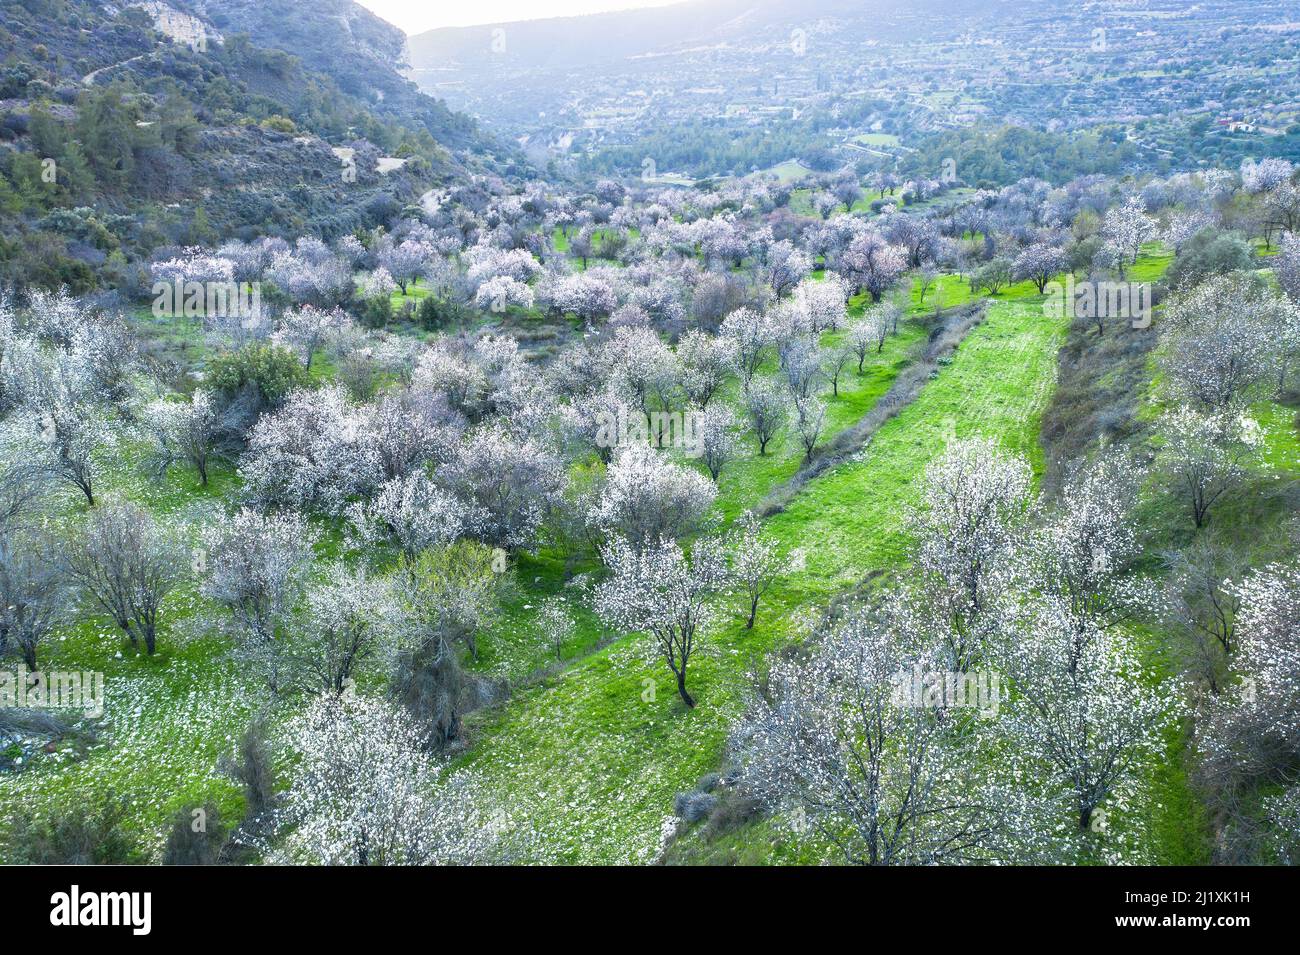 Almond trees grove with white blossoms. Spring landscape in Limnatis, Cyprus Stock Photo